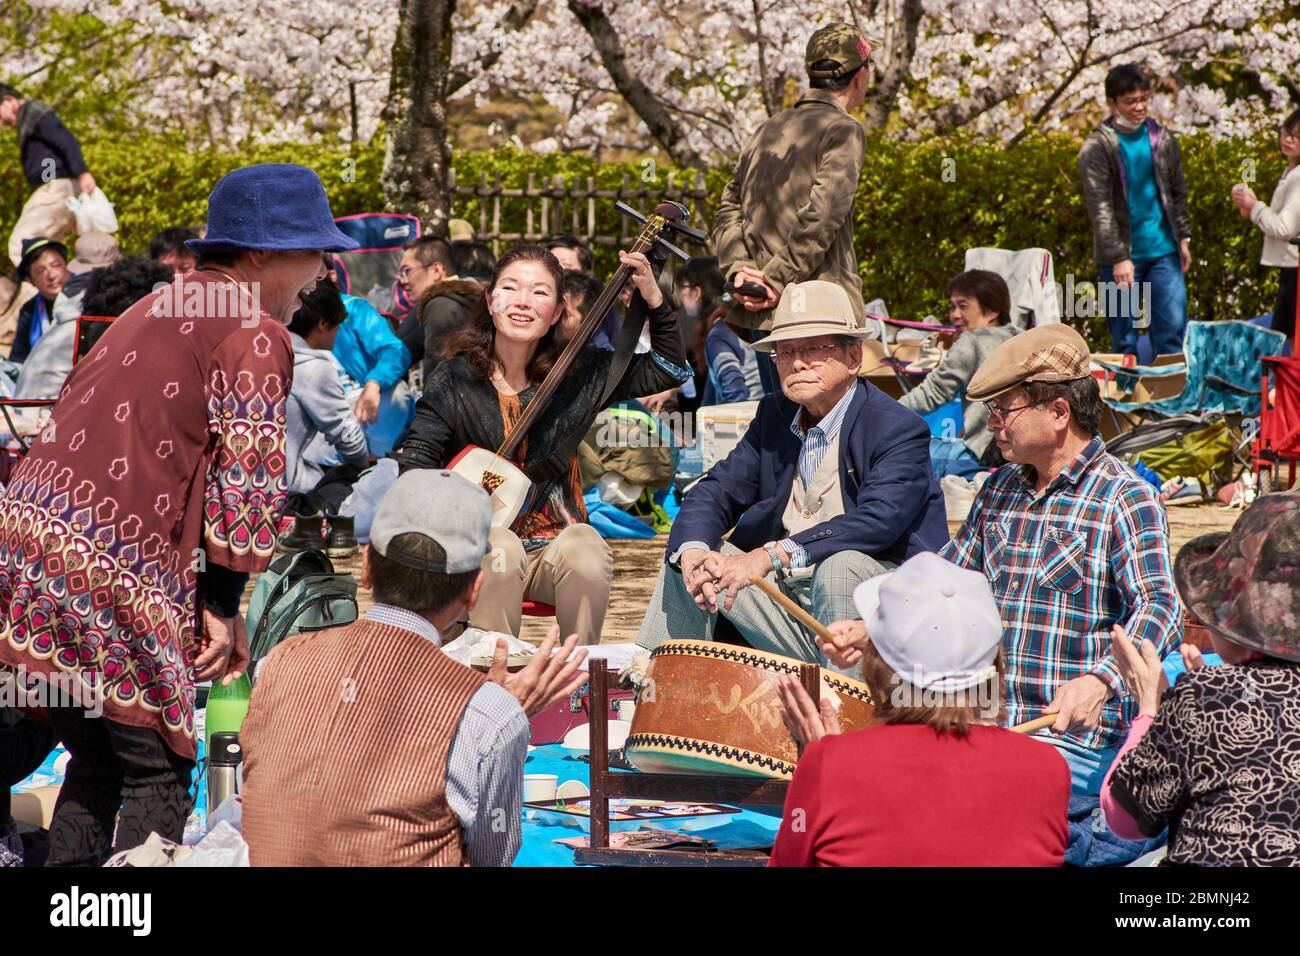 Himeji / Japan - March 31, 2018: People picnicking and singing under blooming cherry blossom trees during the Sakura season in Himeji castle park in H Stock Photo